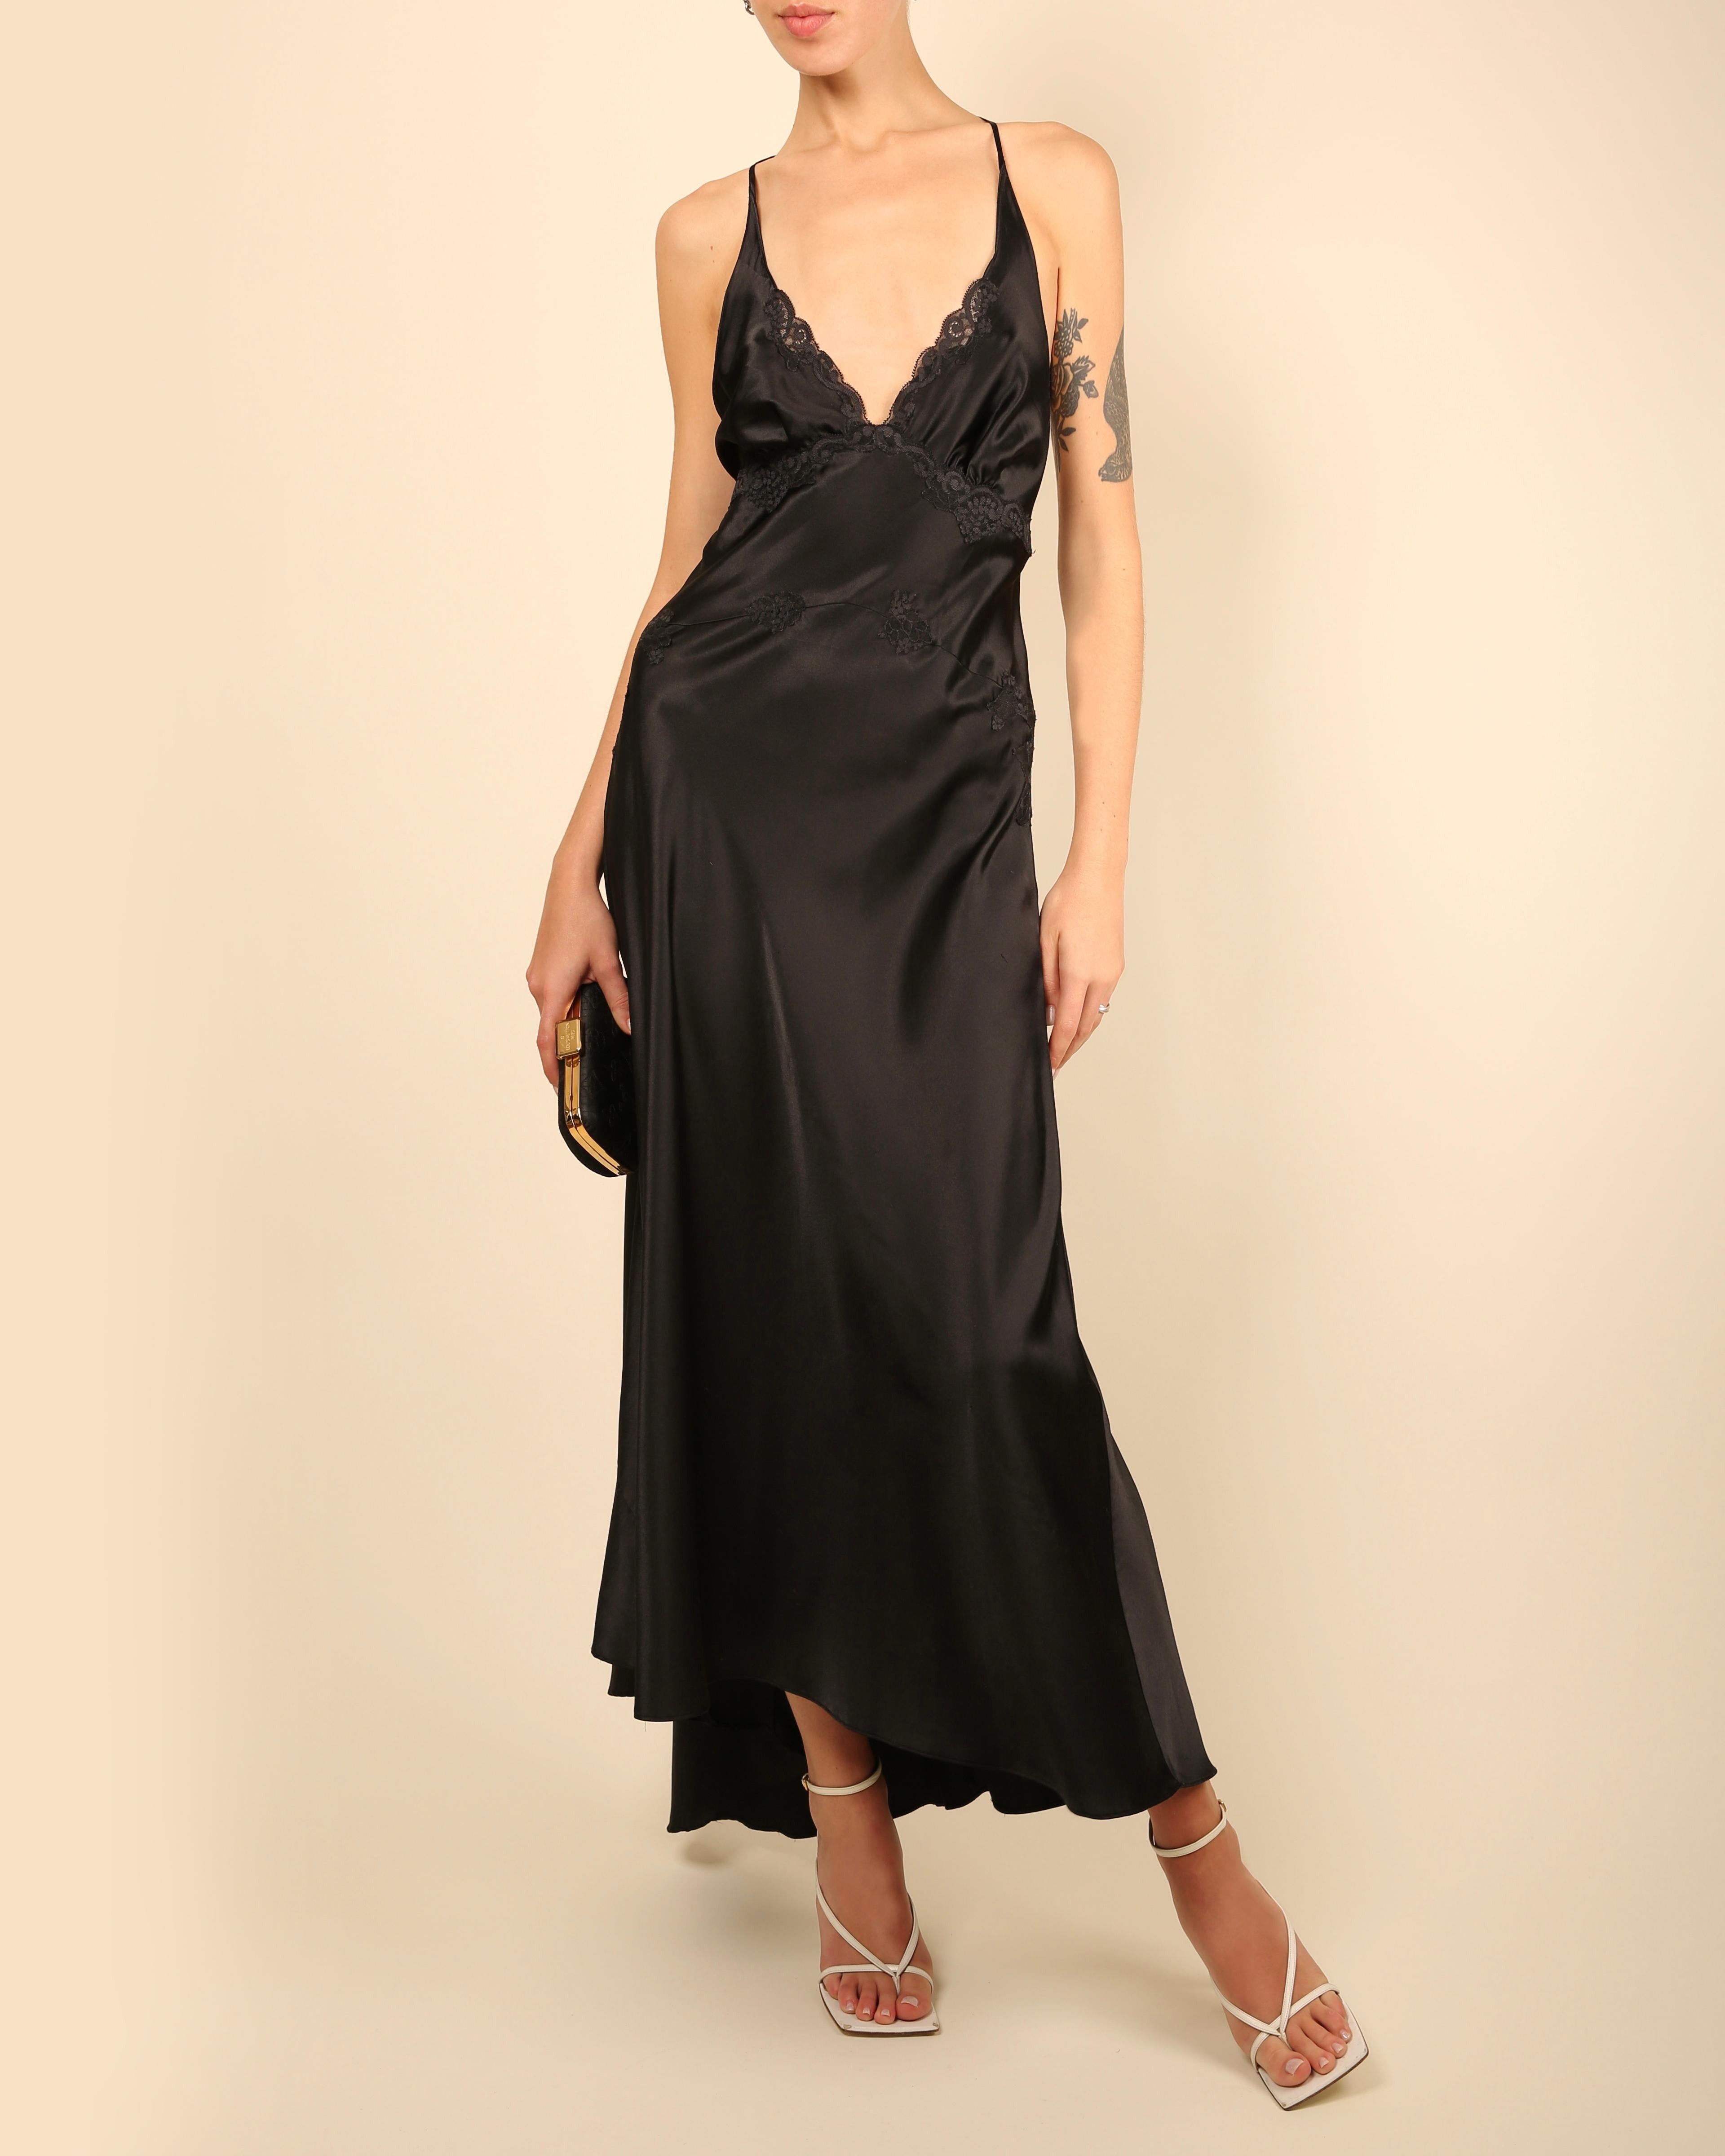 LOVE LALI Vintage

A beautiful satin vintage slip style maxi dress in black
Lace inserts and trim
Adjustable straps
Cut out back with ties

Composition:
No composition label - estimated to be satin (100% polyester)

Size:
No size label - estimated